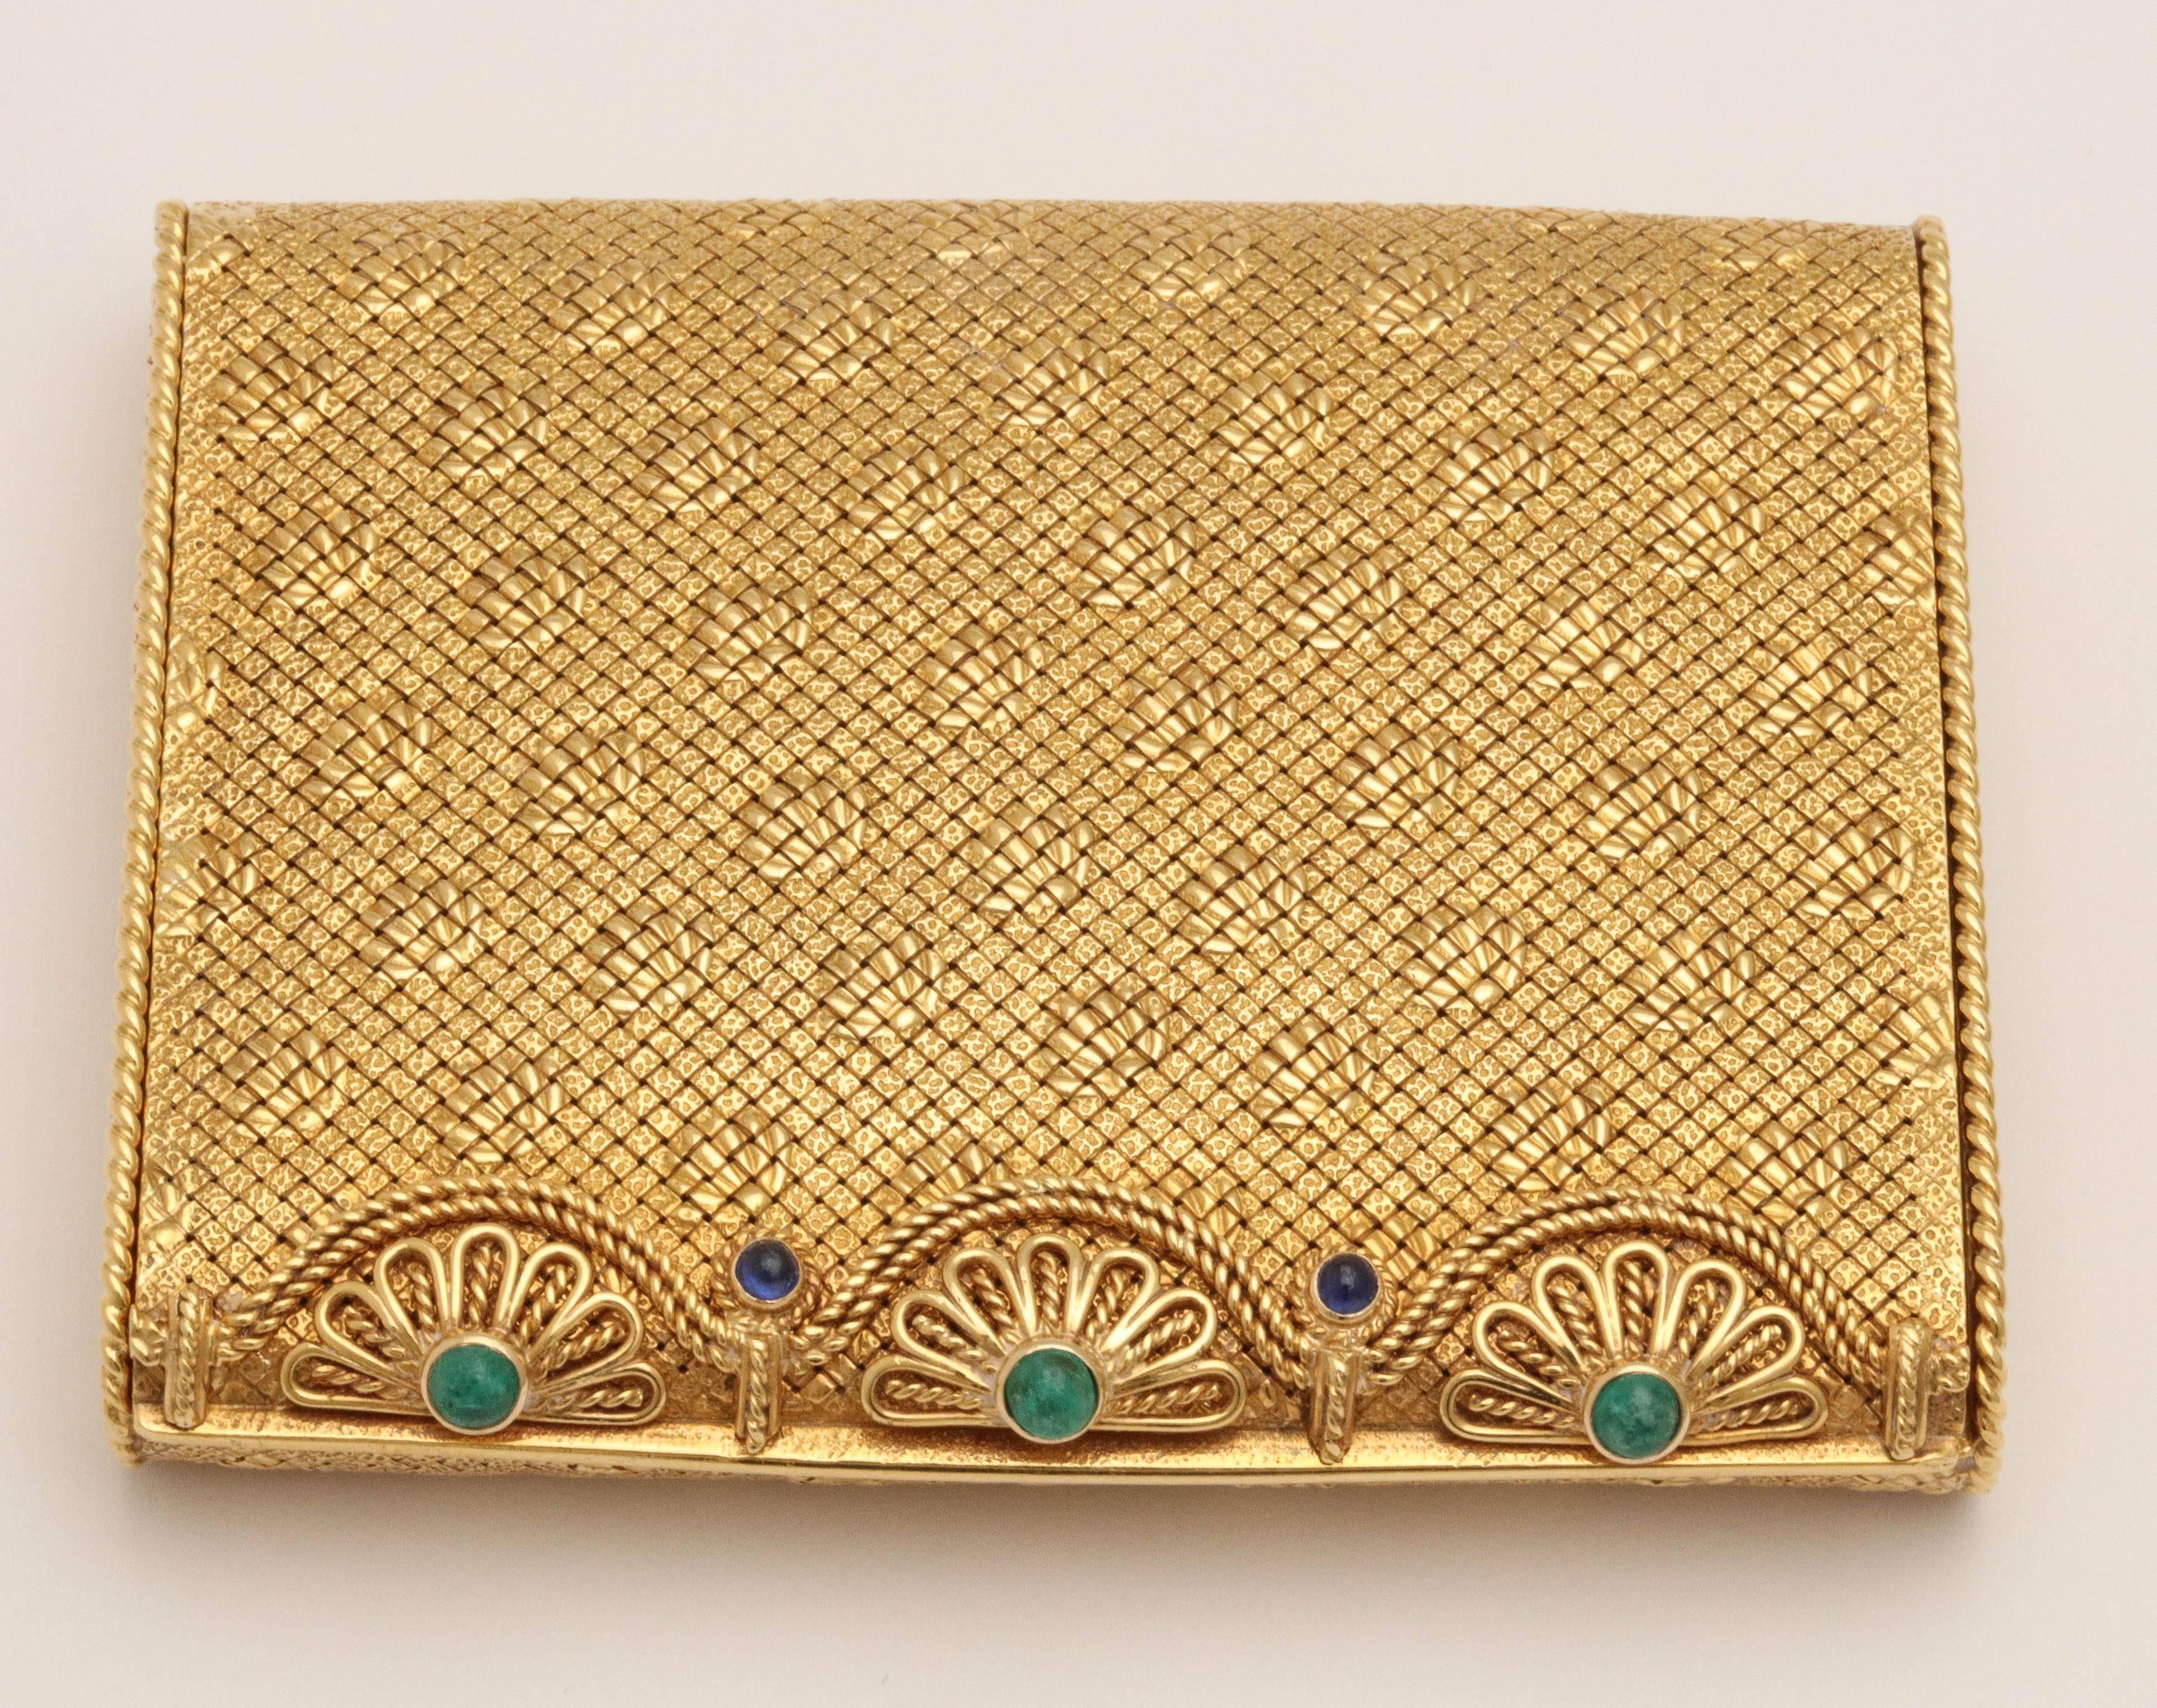 Very elegant VCA 18kts woven Yellow Gold & brocaded pattern Compact.
Made in the 1960 - when all you needed was your compact and your jewels.
The opening spans the compact and is set with 3 Cabochon Emeralds and 2 Ca
bochon Sapphires nestled in